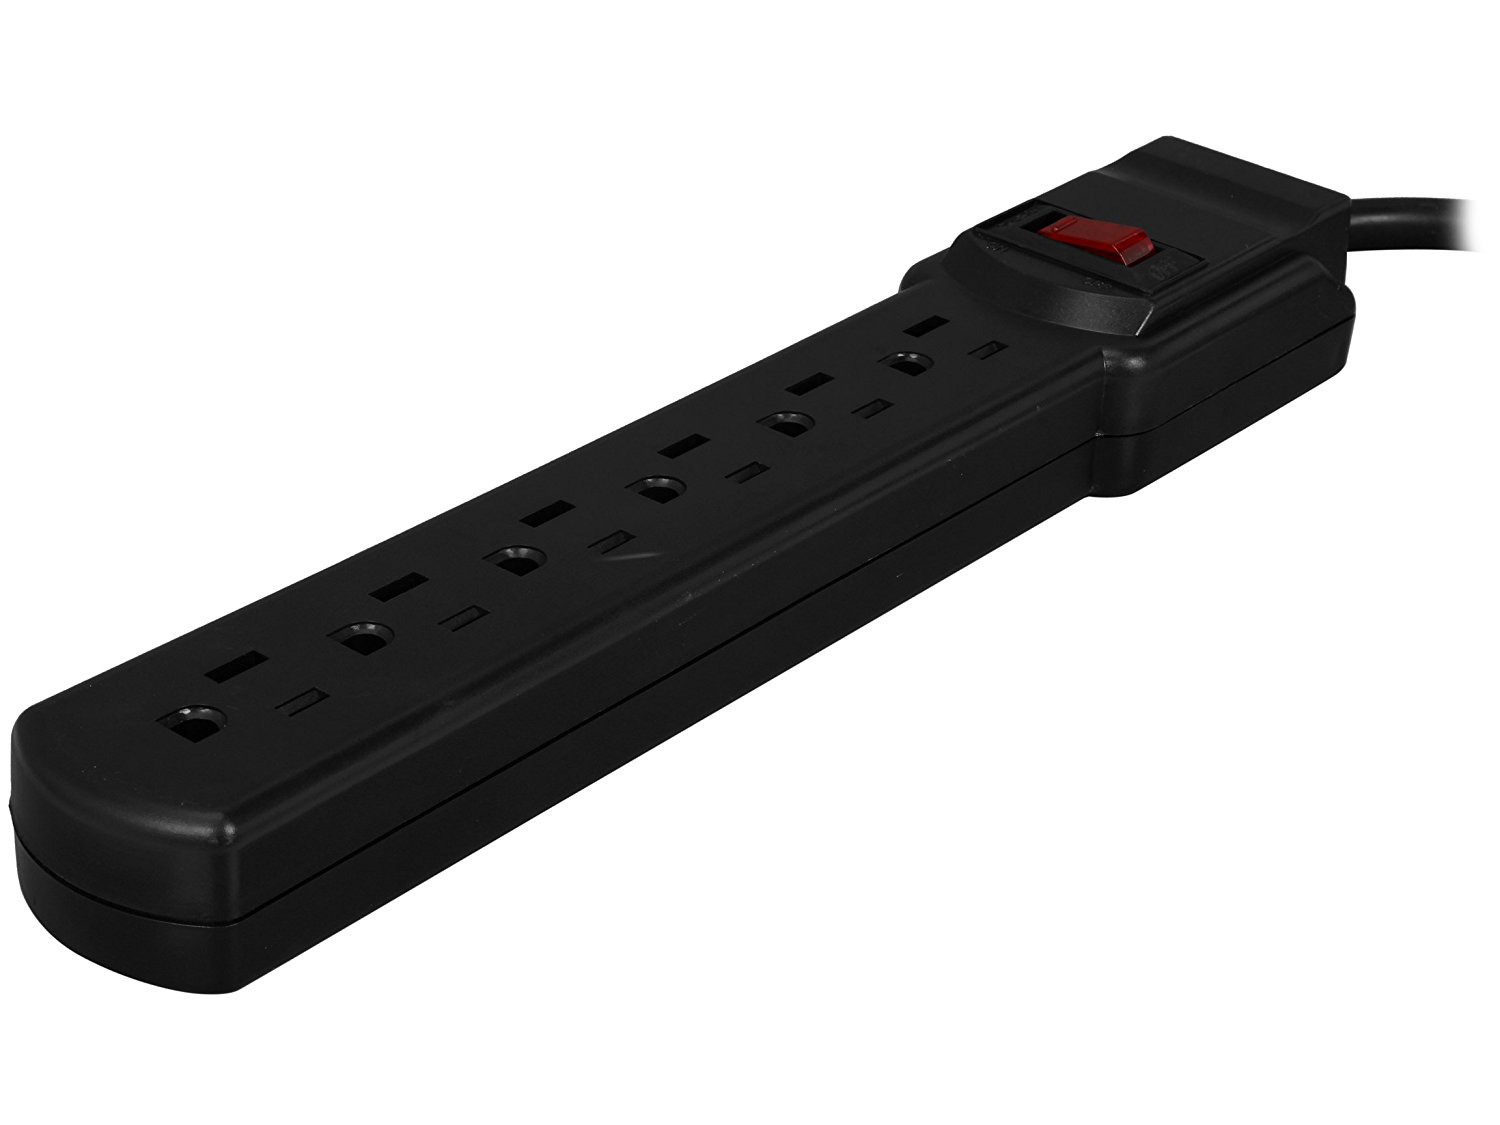 Today only: Rosewill 6-outlet power strip with 3-foot cord for $0 after rebate